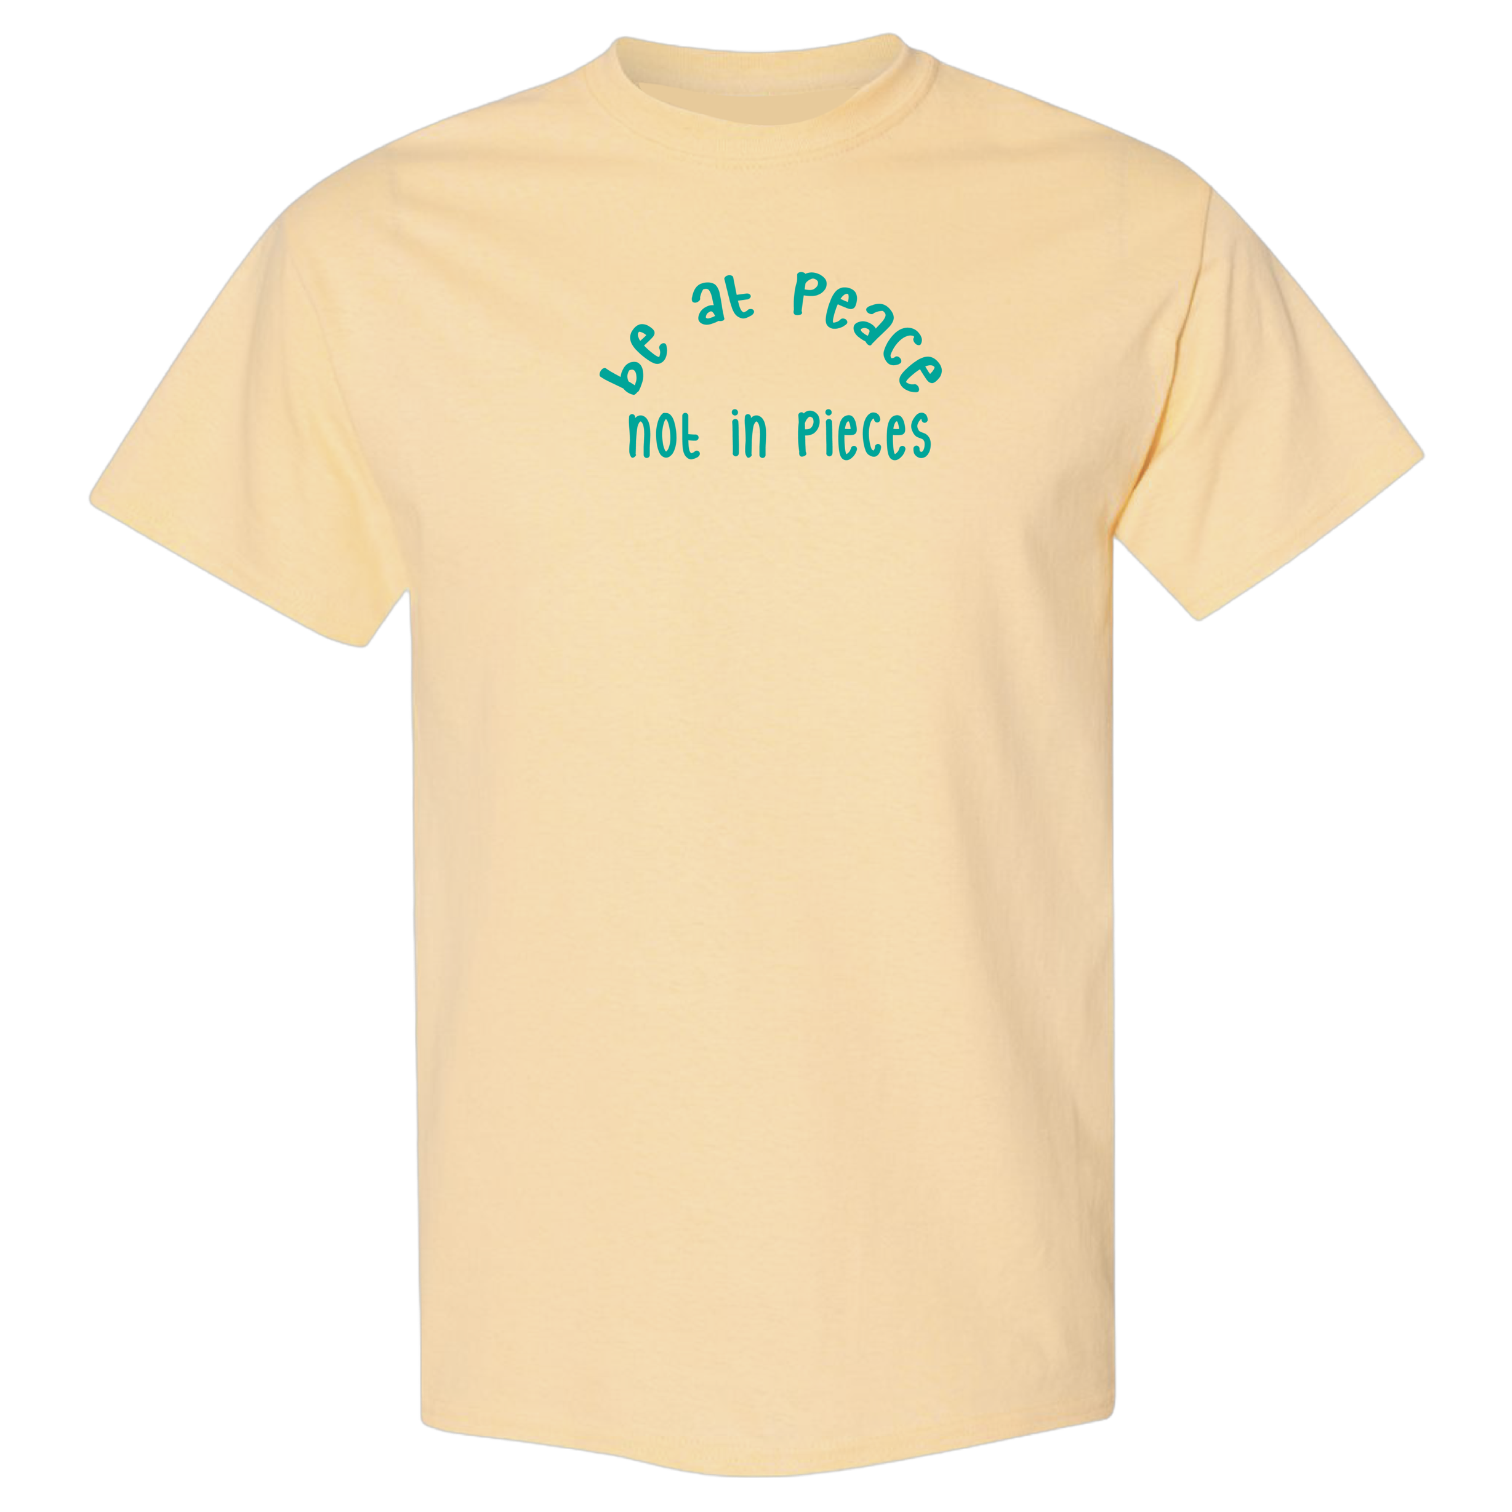 Be At Peace Tee (Pale Yellow)